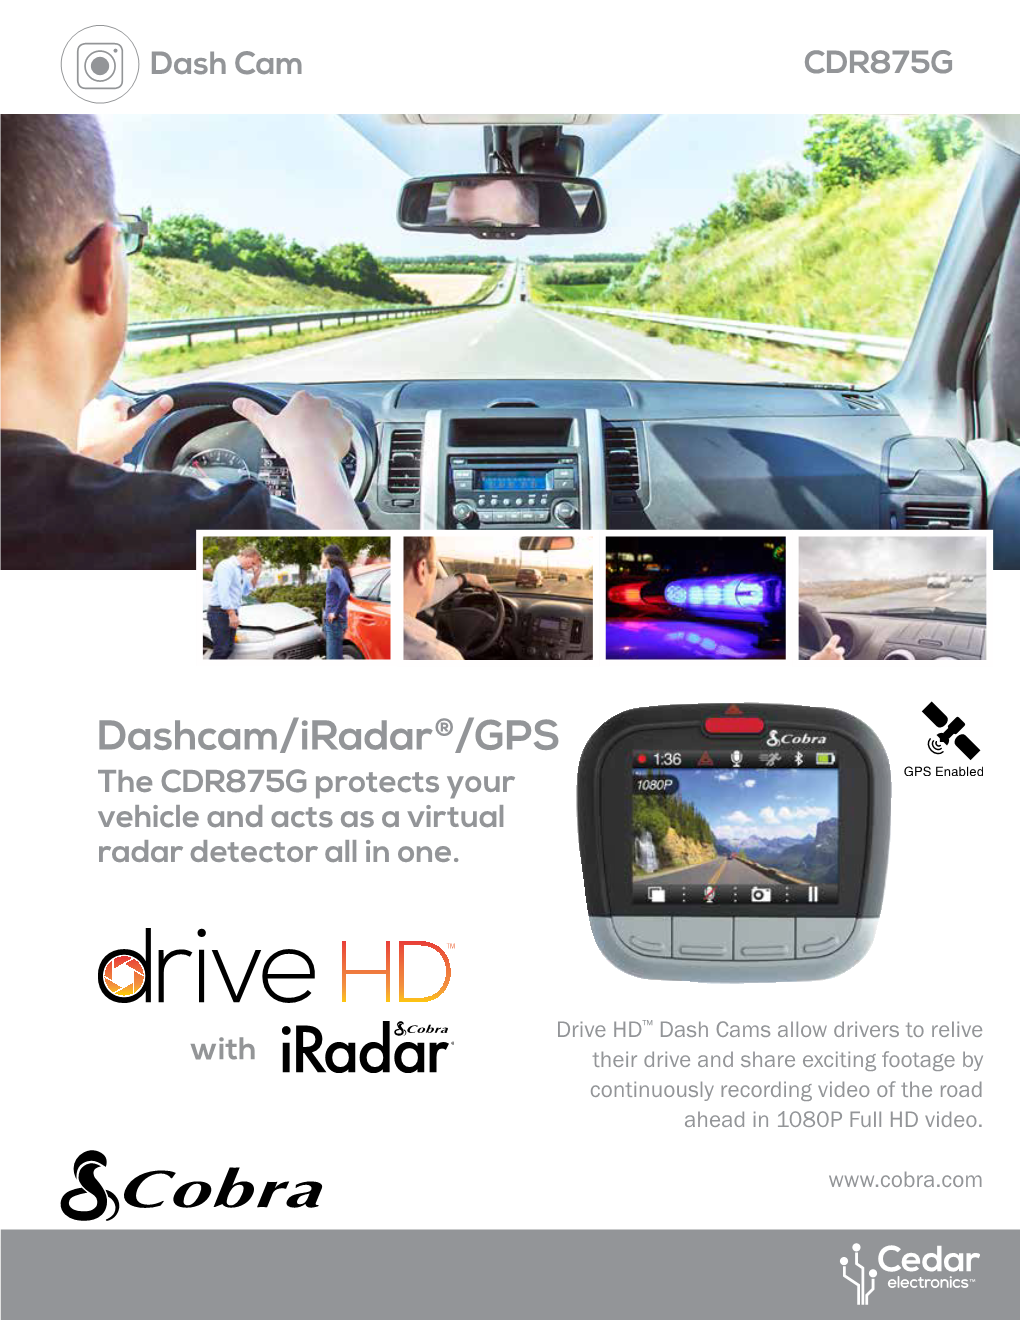 Dashcam/Iradar®/GPS the CDR875G Protects Your Vehicle and Acts As a Virtual Radar Detector All in One